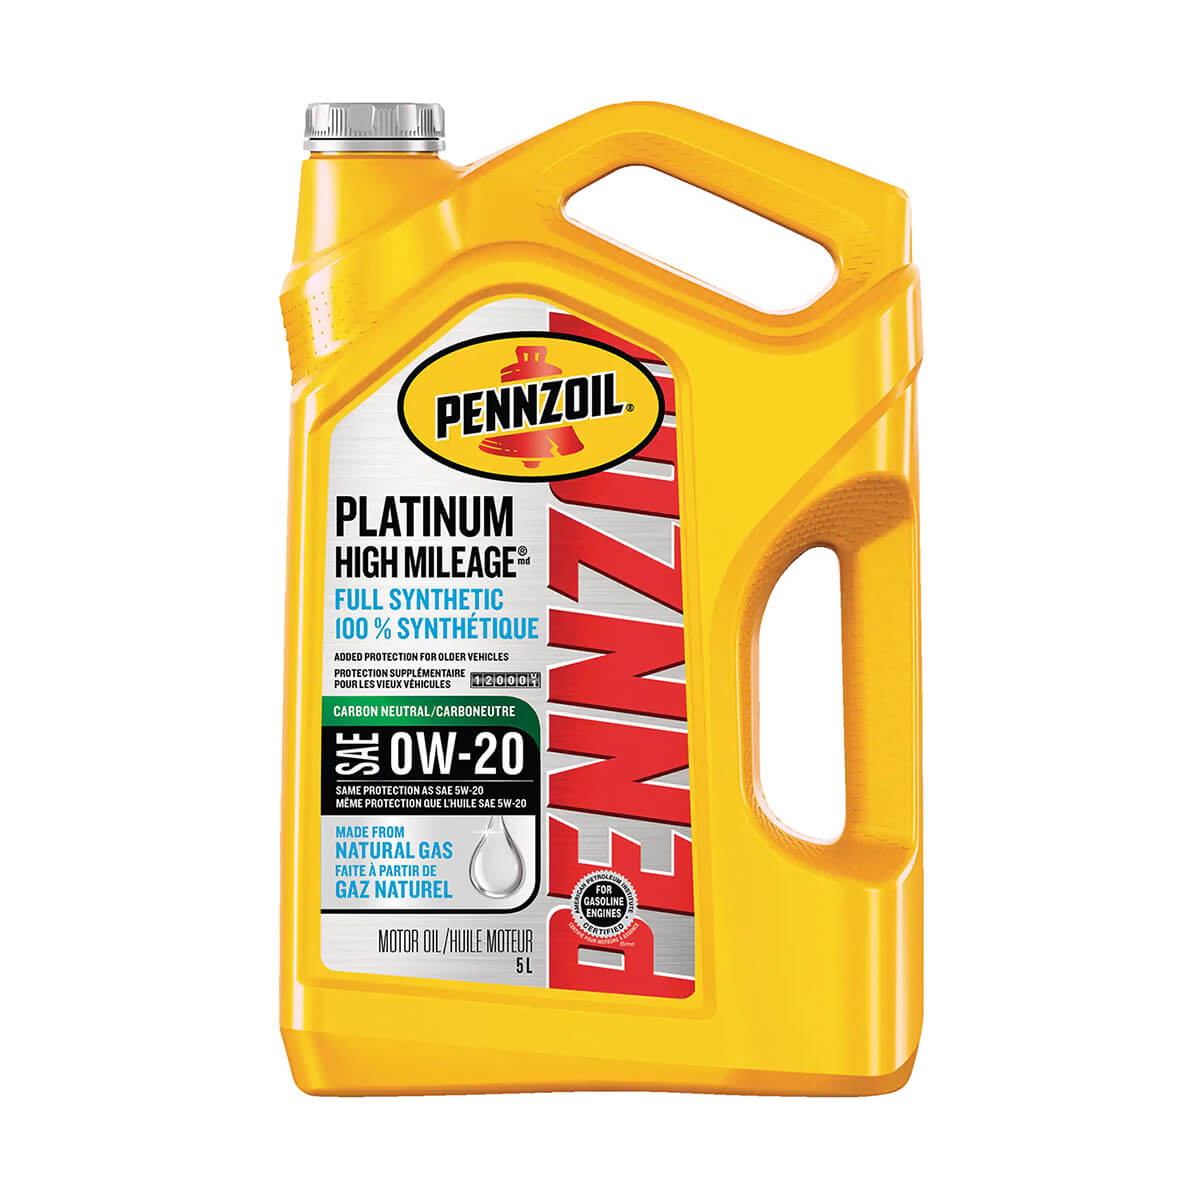 Shell Pennzoil Platinum Synthetic 0W-20 - 5 L